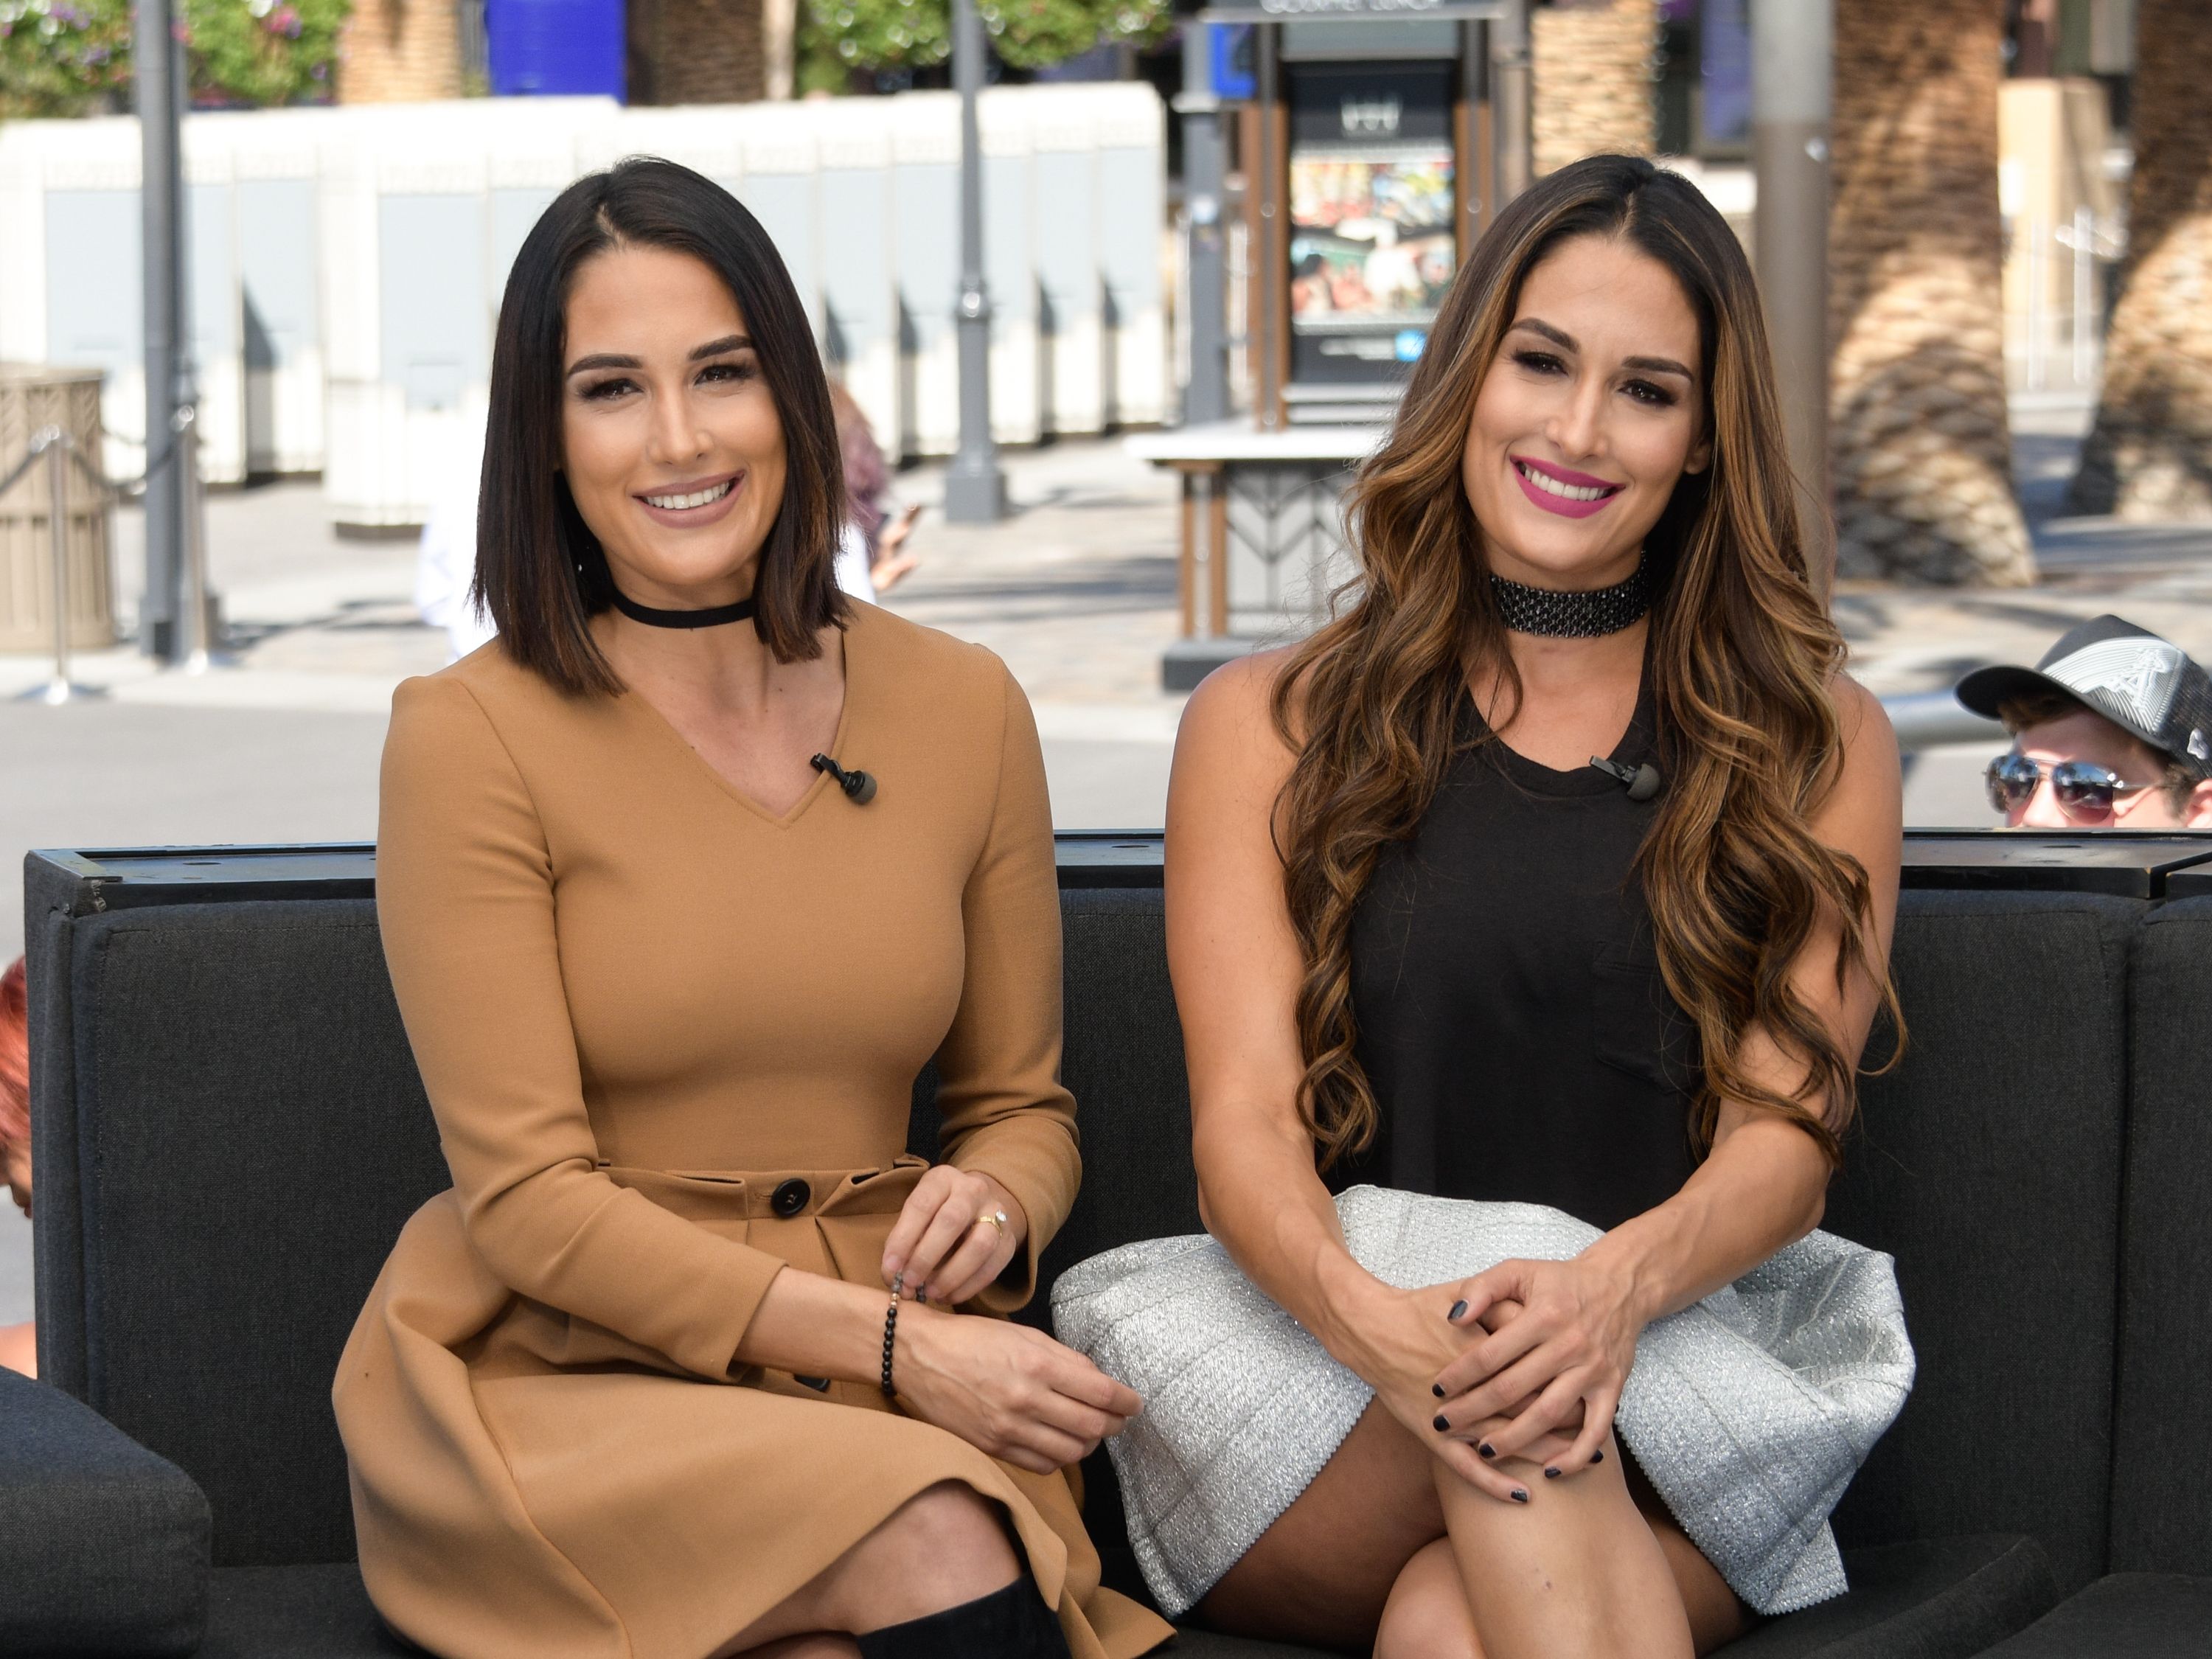 Brie and Nikki Bella visit "Extra" at Universal Studios Hollywood on October 3, 2016 | Photo: Getty Images